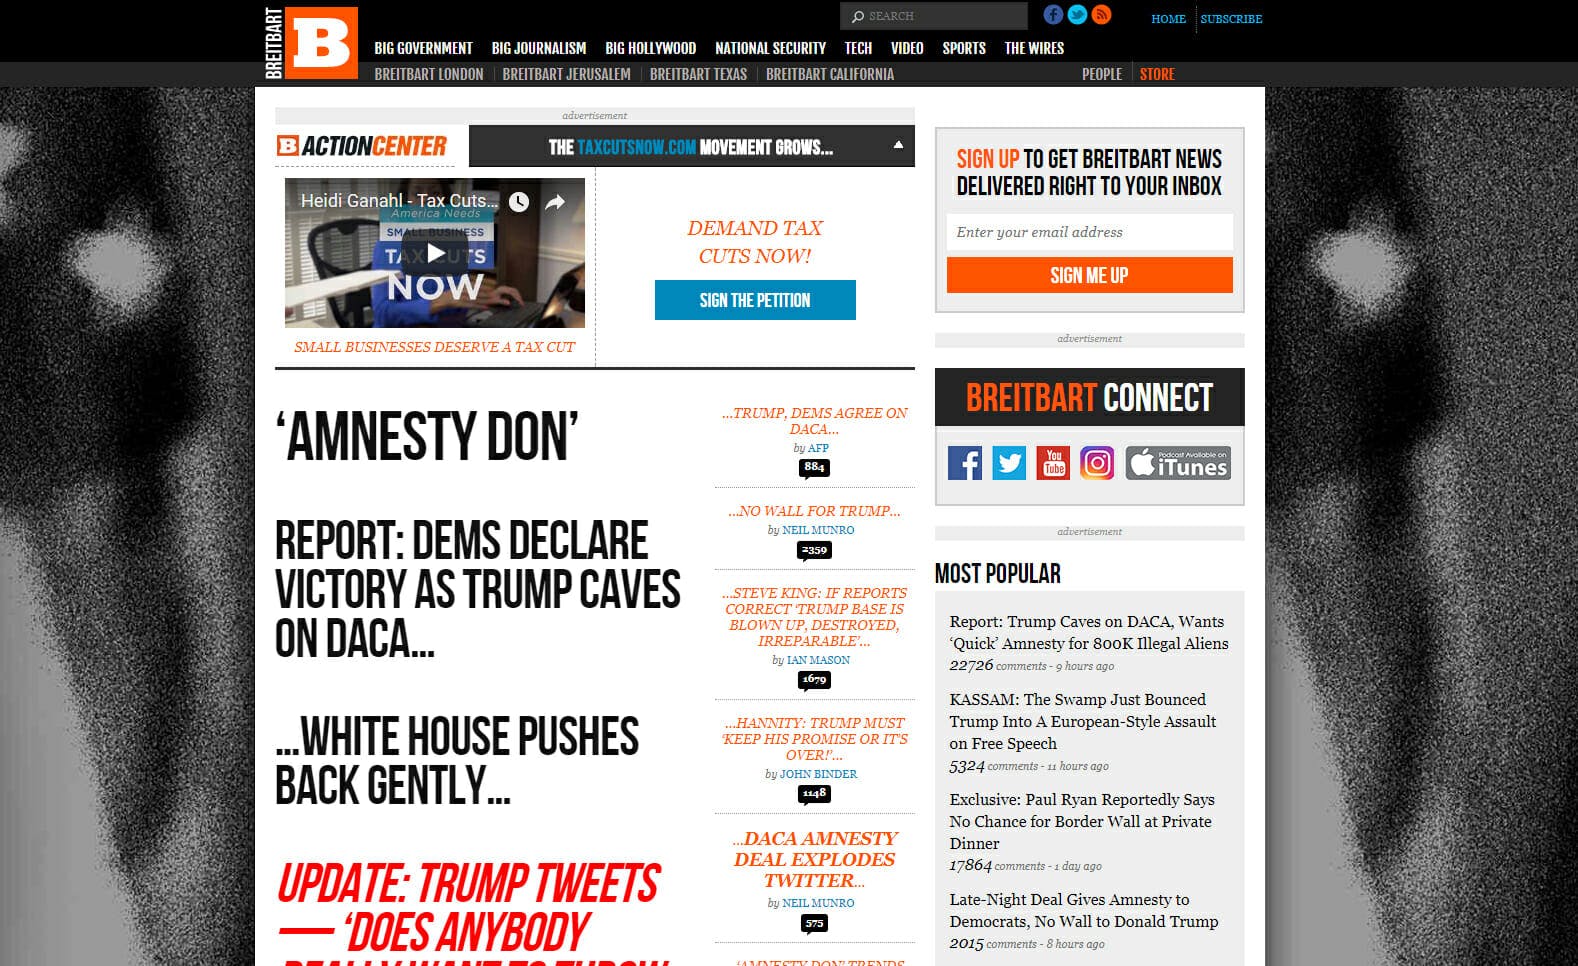 Breitbart's homepage on Sept. 14